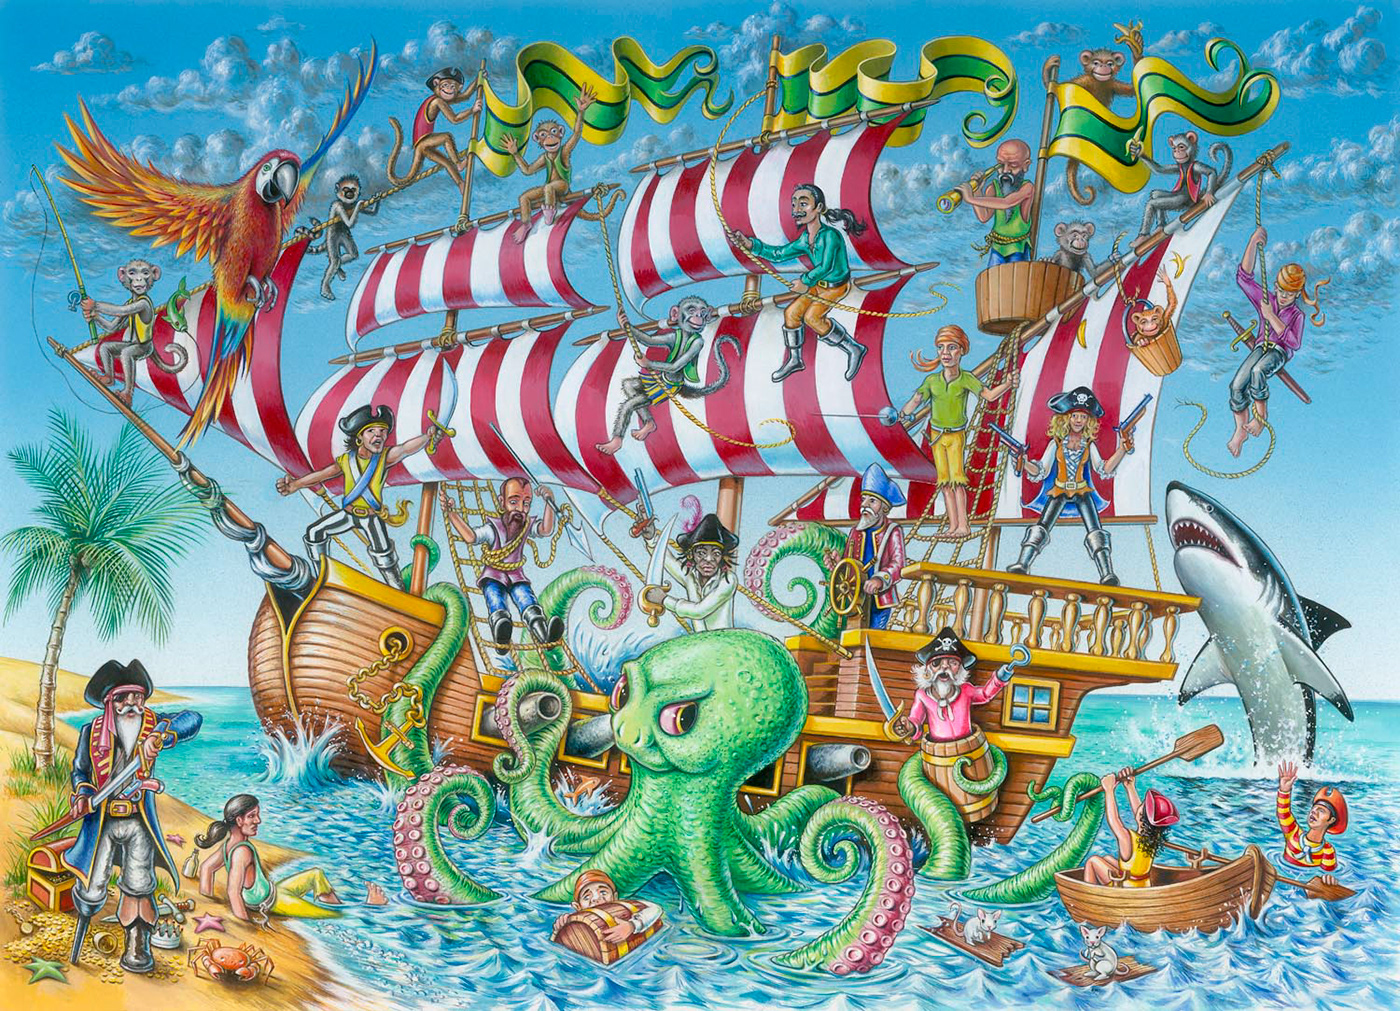 fun colourful illustration of pirates ; monkeys. Designed for use as a jigsaw puzzle